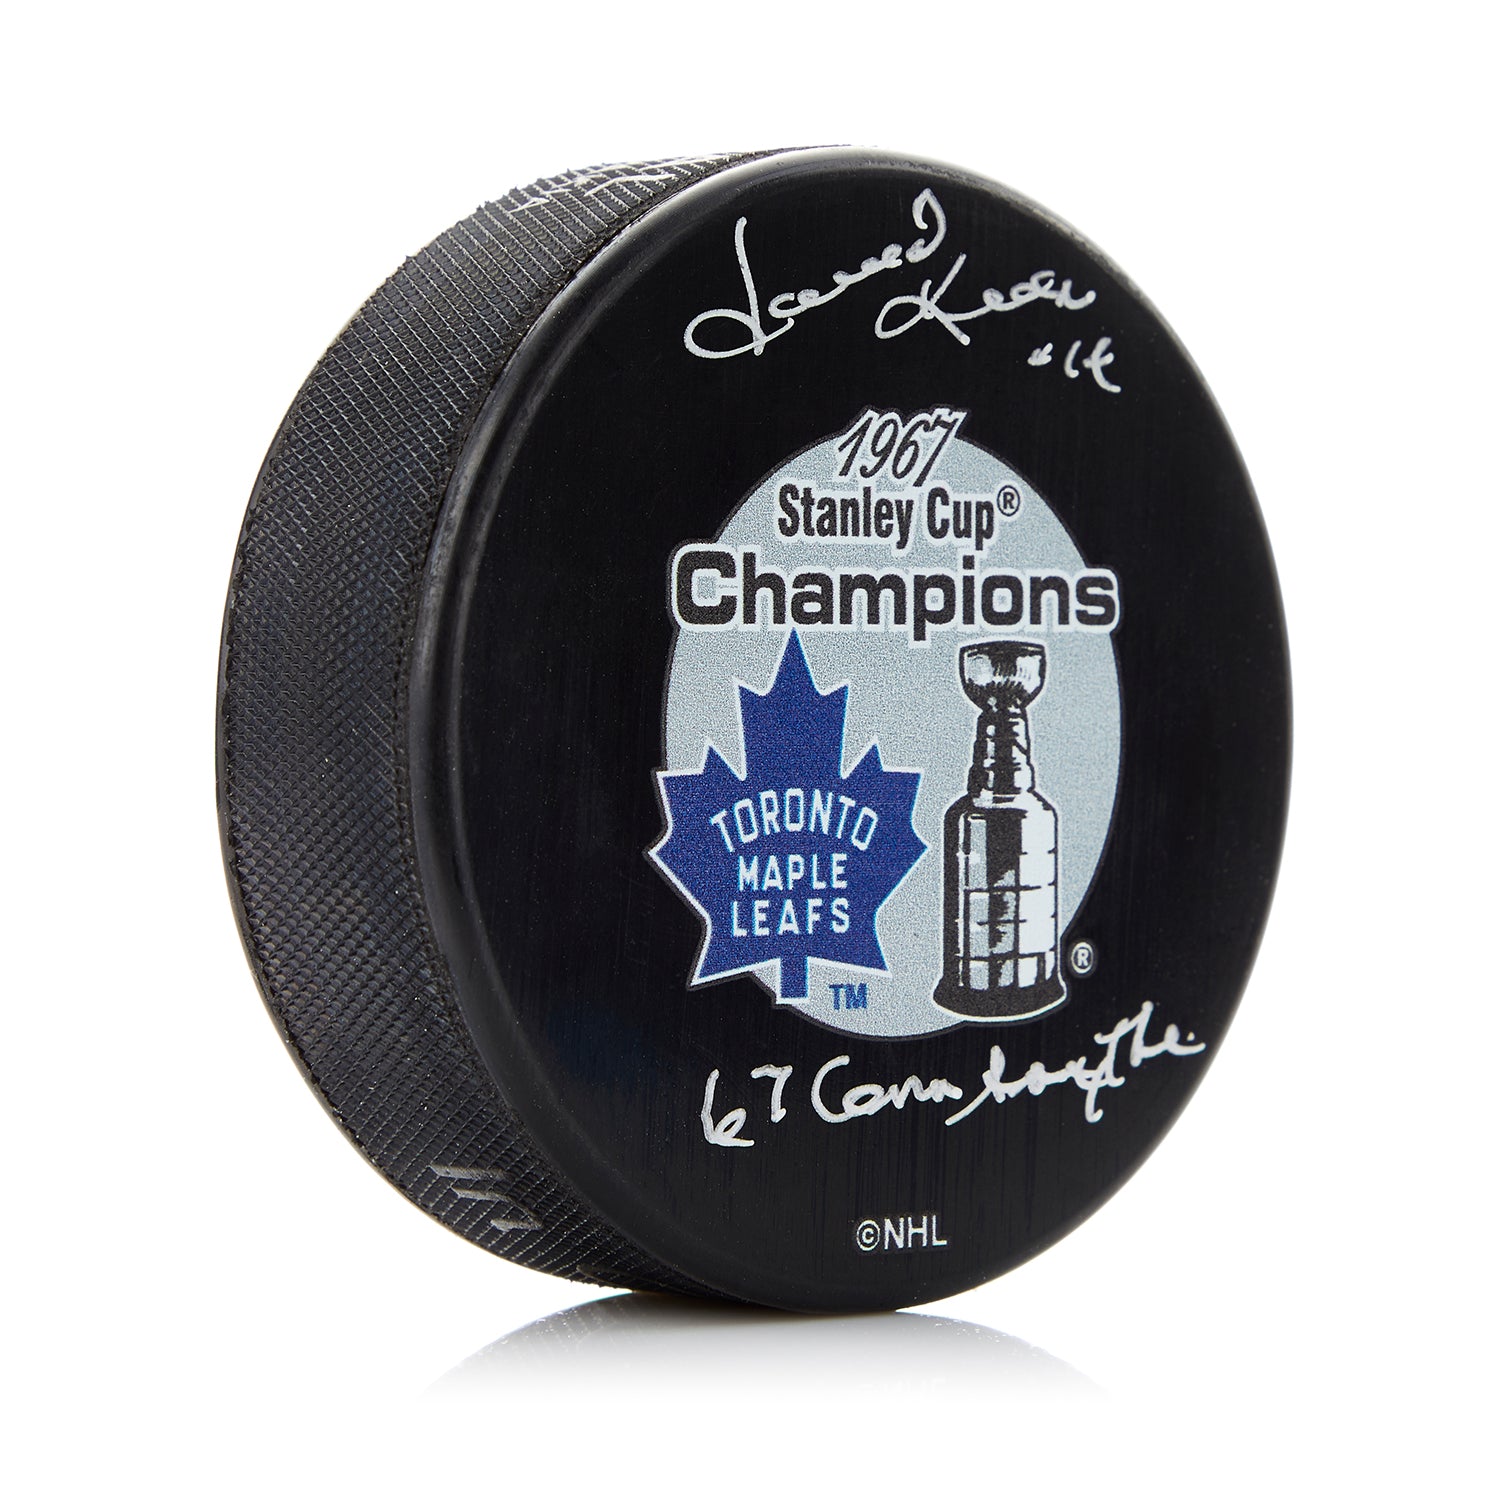 Dave Keon Signed Toronto Maple Leafs Puck with Conn Smythe Note